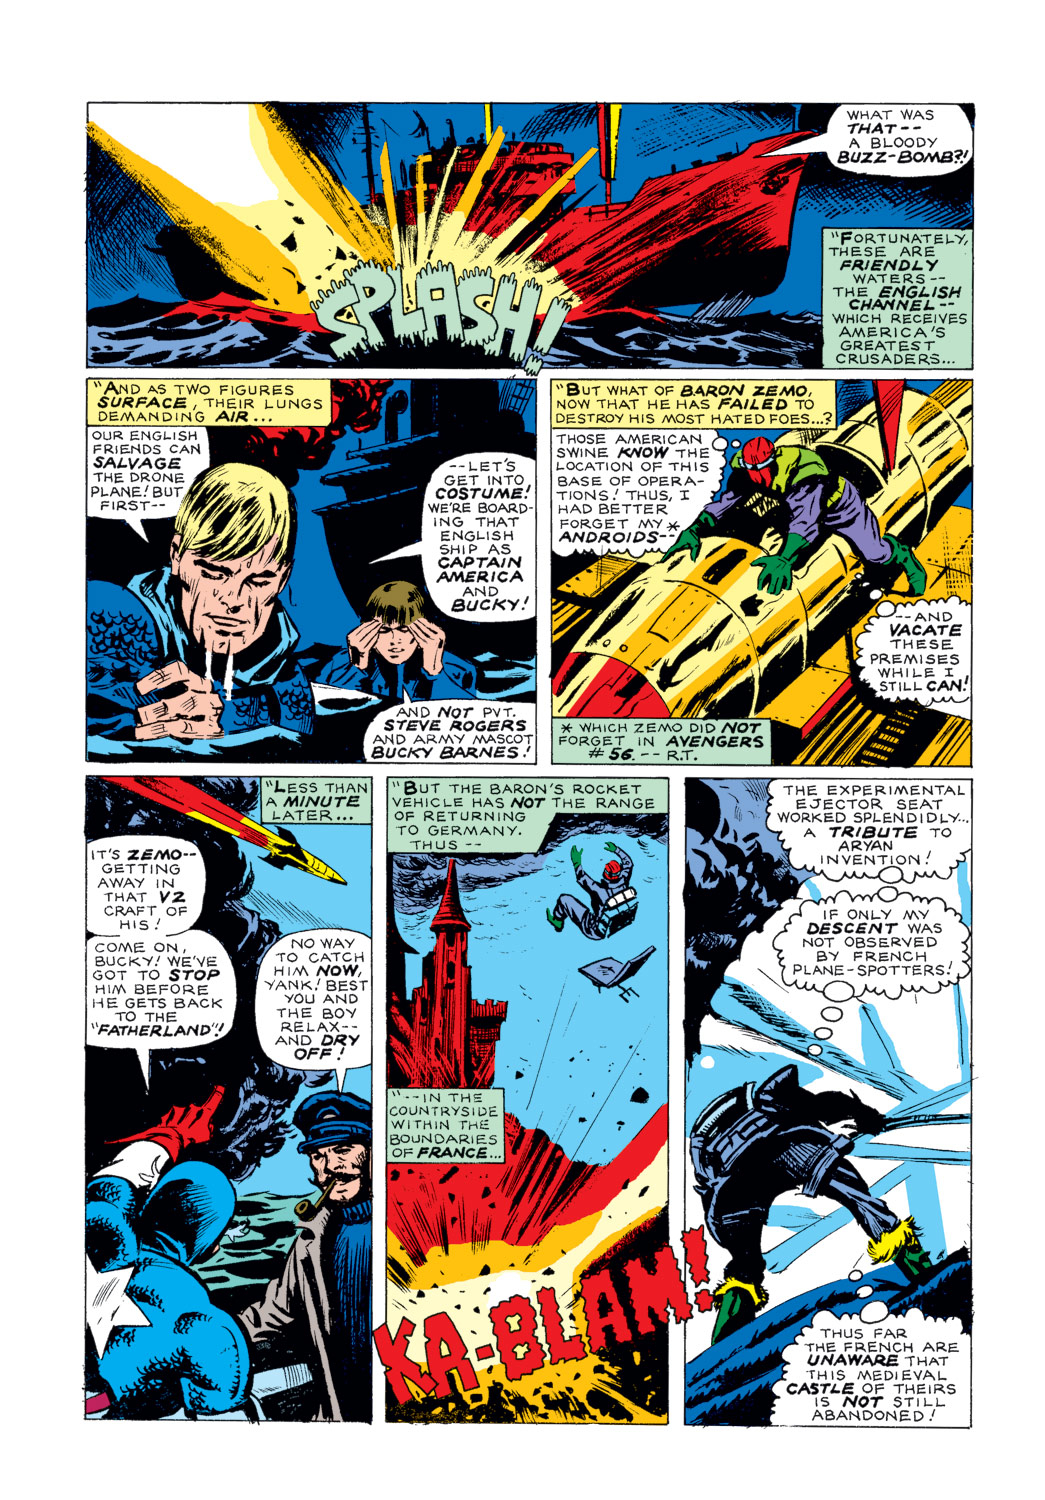 What If? (1977) issue 5 - Captain America hadn't vanished during World War Two - Page 6